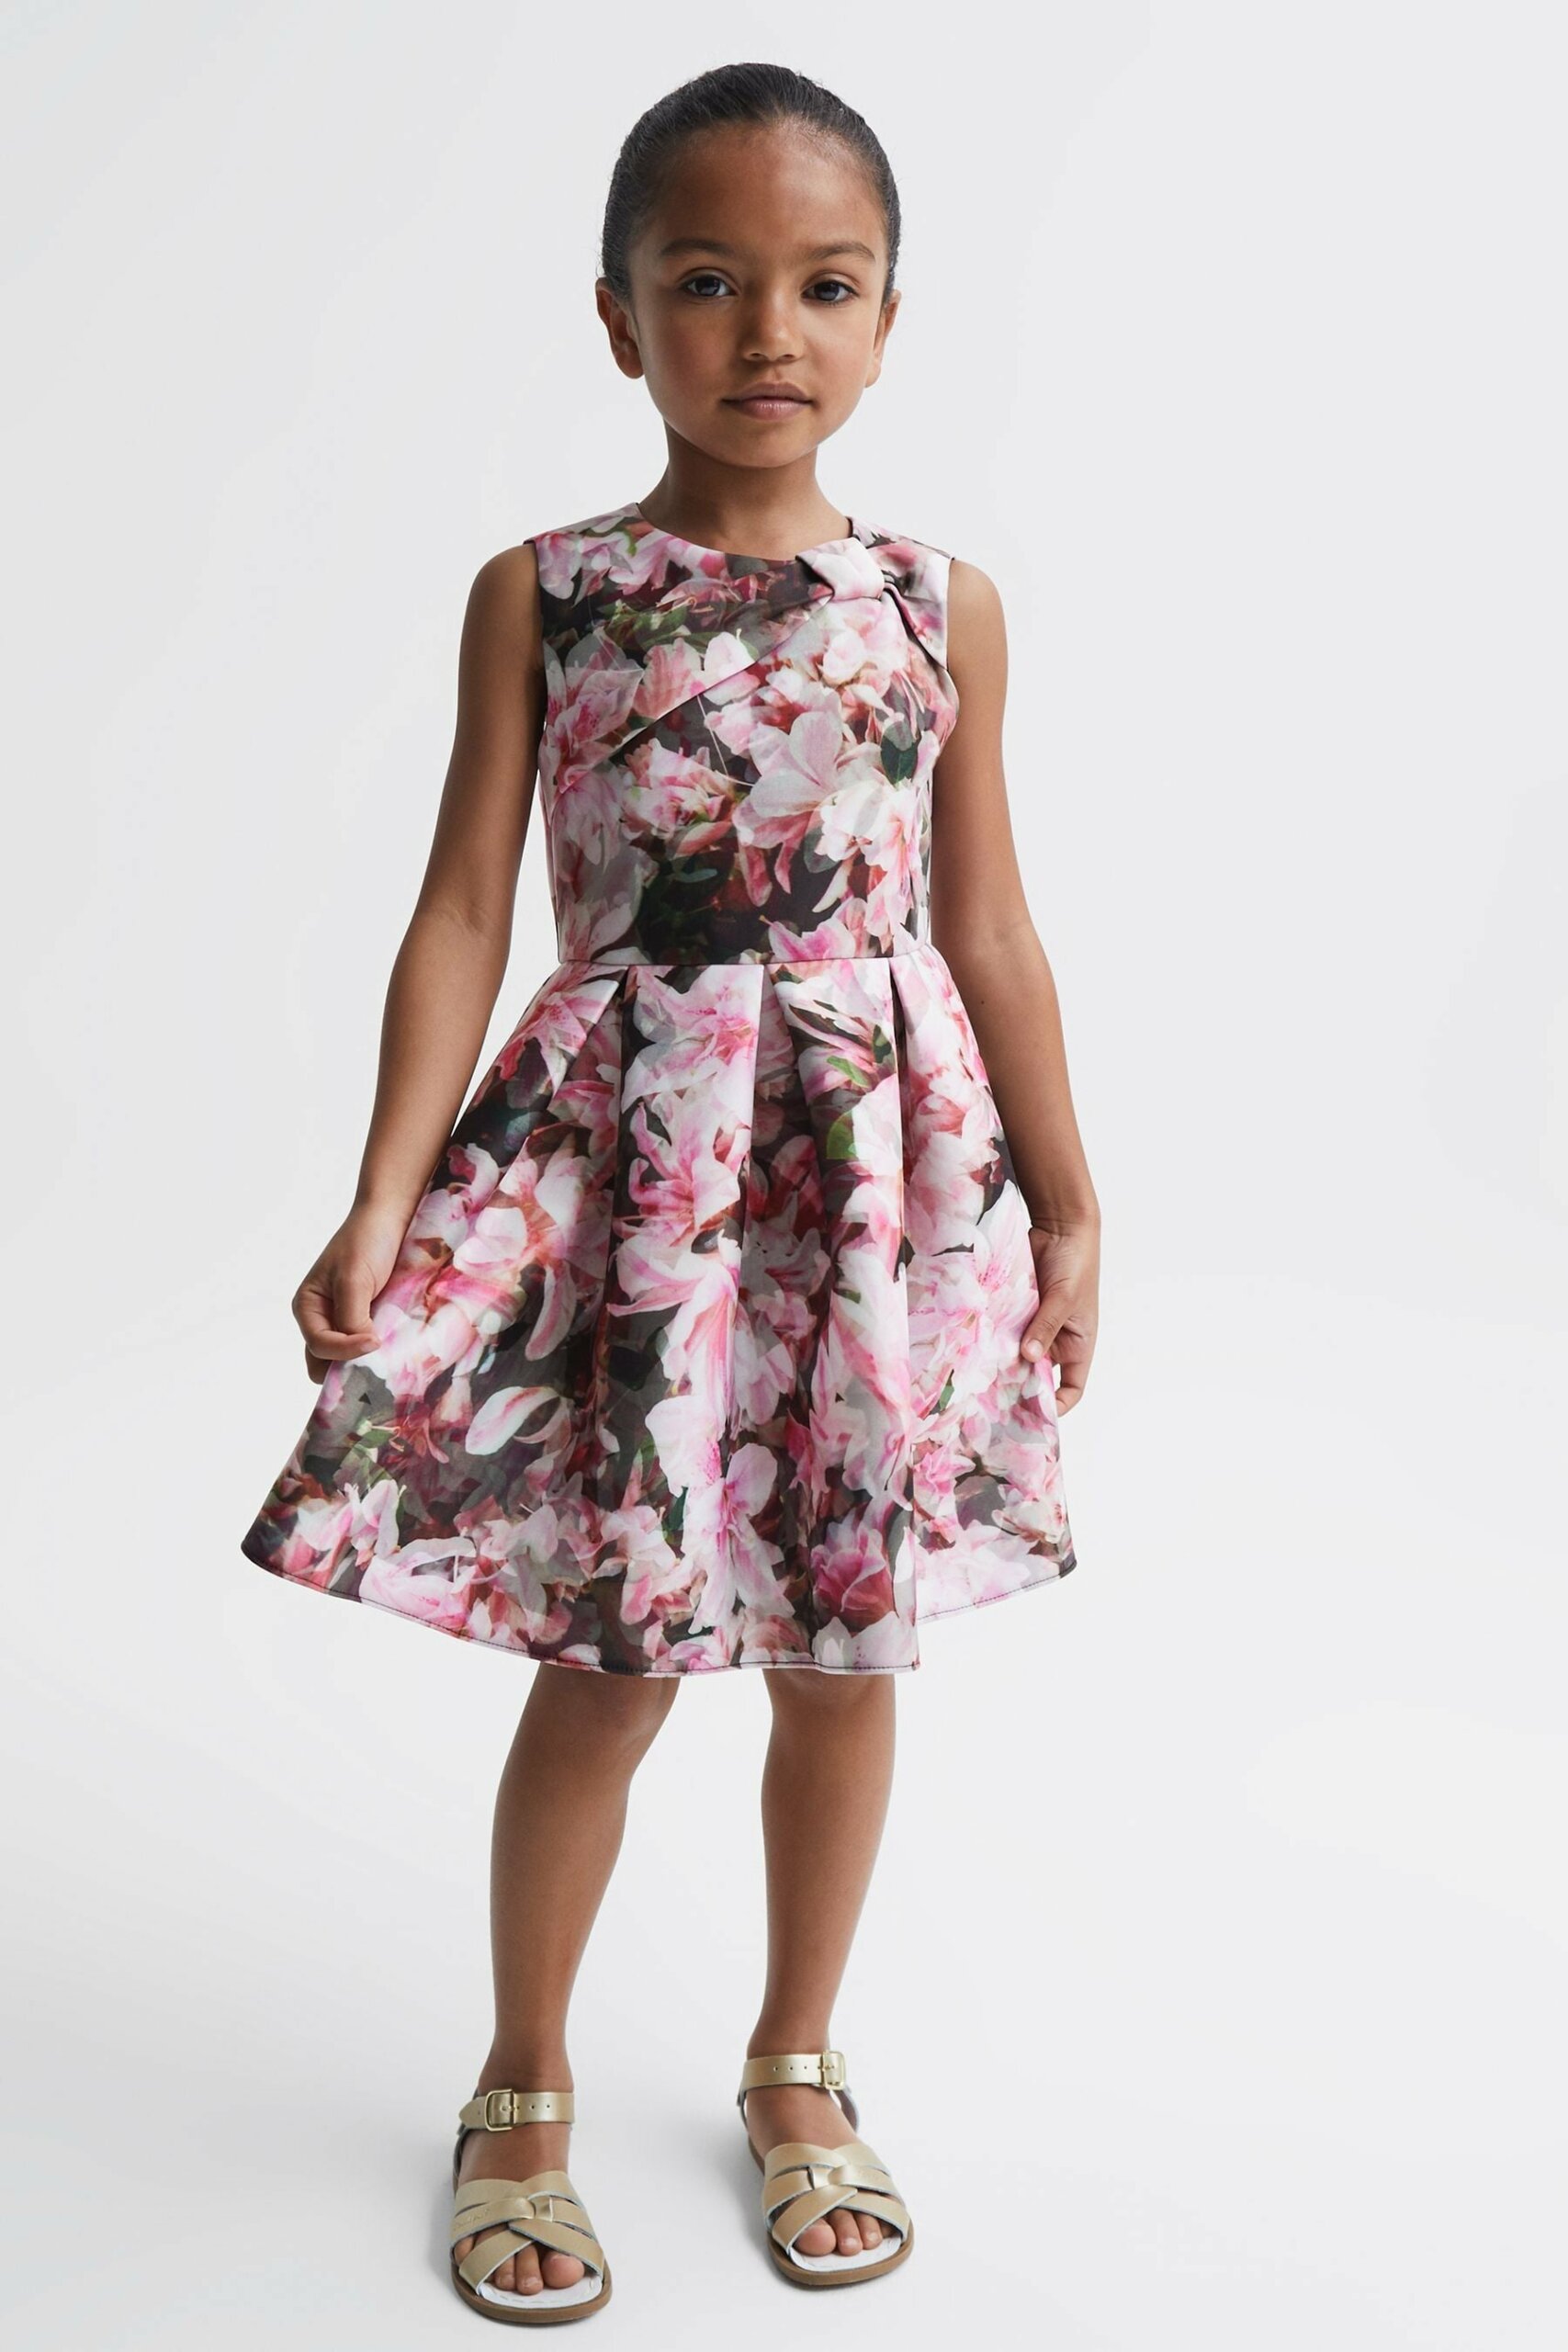 Emily Scuba Floral Printed Dress - Pink and Black, Size: 5